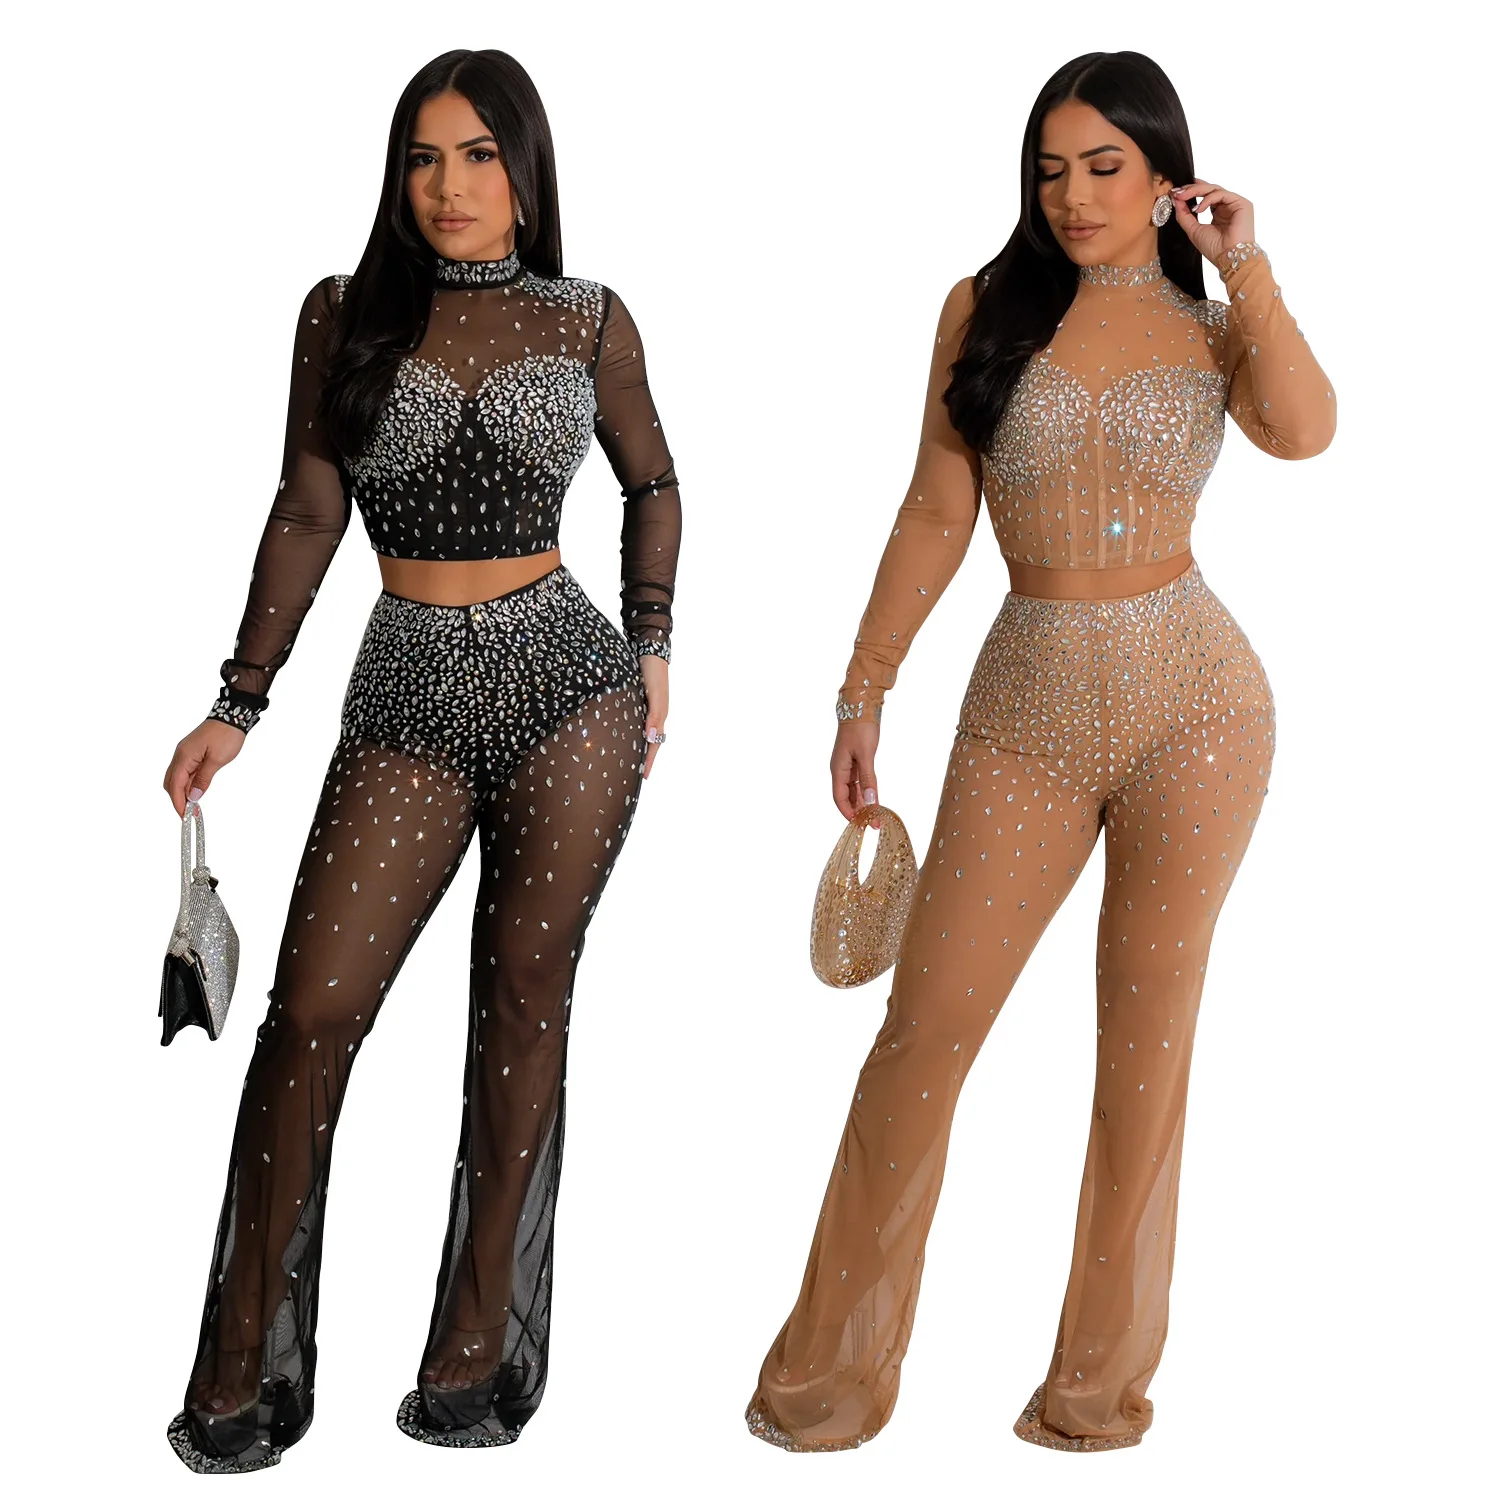 EINYOO Y2k Rhinestone Mesh See Through Long Sleeve Dresses Set for Women Birthday Sexy Night Club Party 2 Piece Sets Outfit Traf hlj fashion luxury rhinestone mesh perspective jumpsuits women round neck long sleeve bodycon playsuits sexy lady party overalls